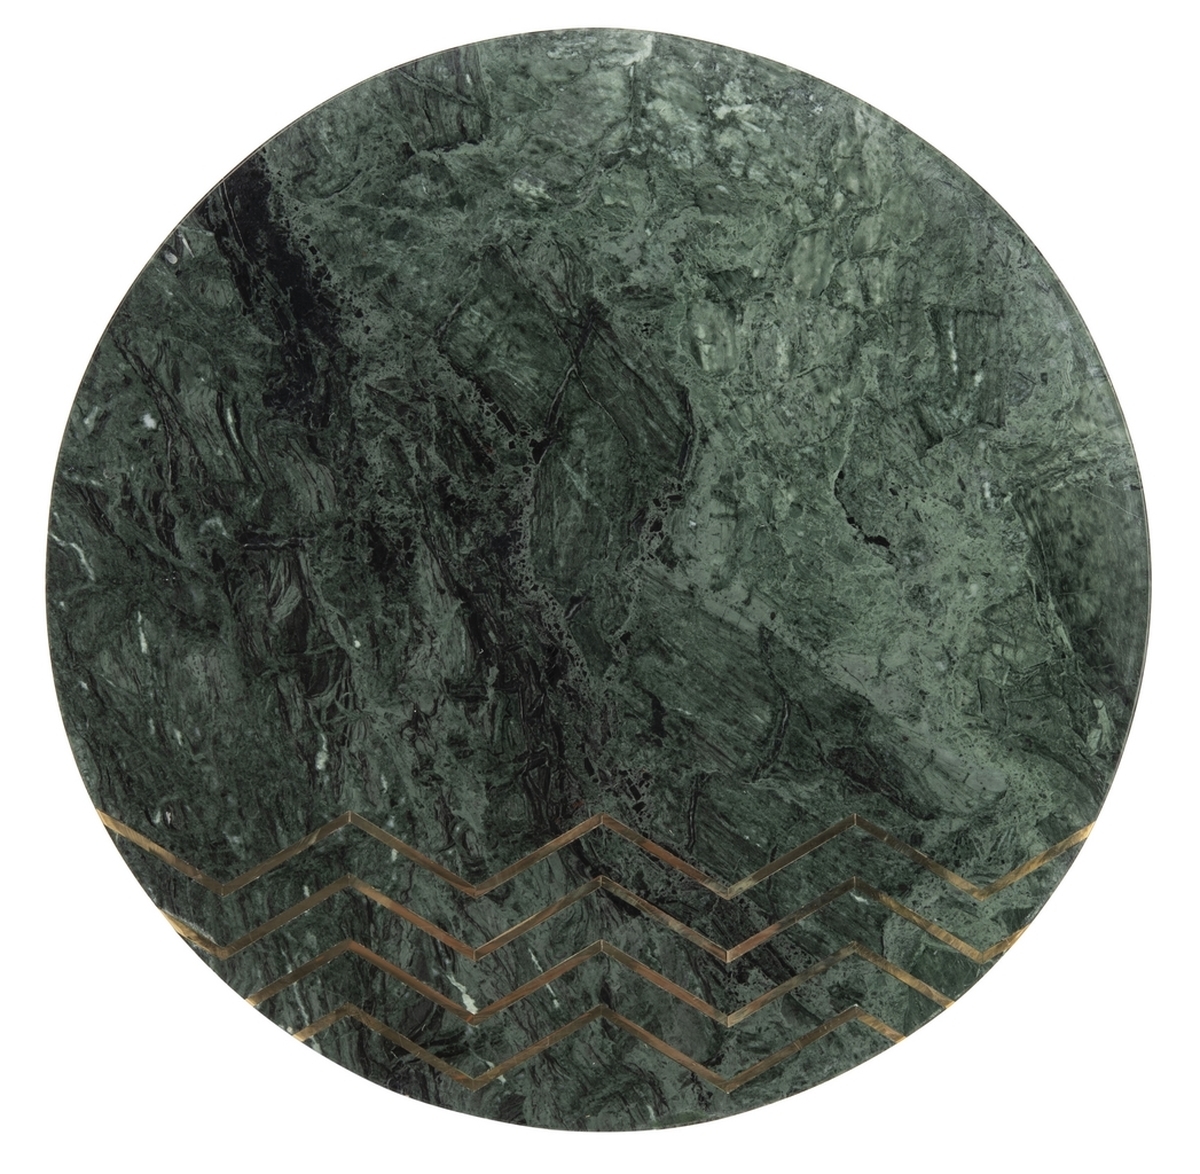 Coletta Round Marble Accent Table - Dark Green/Black/Gold - Arlo Home - Image 2